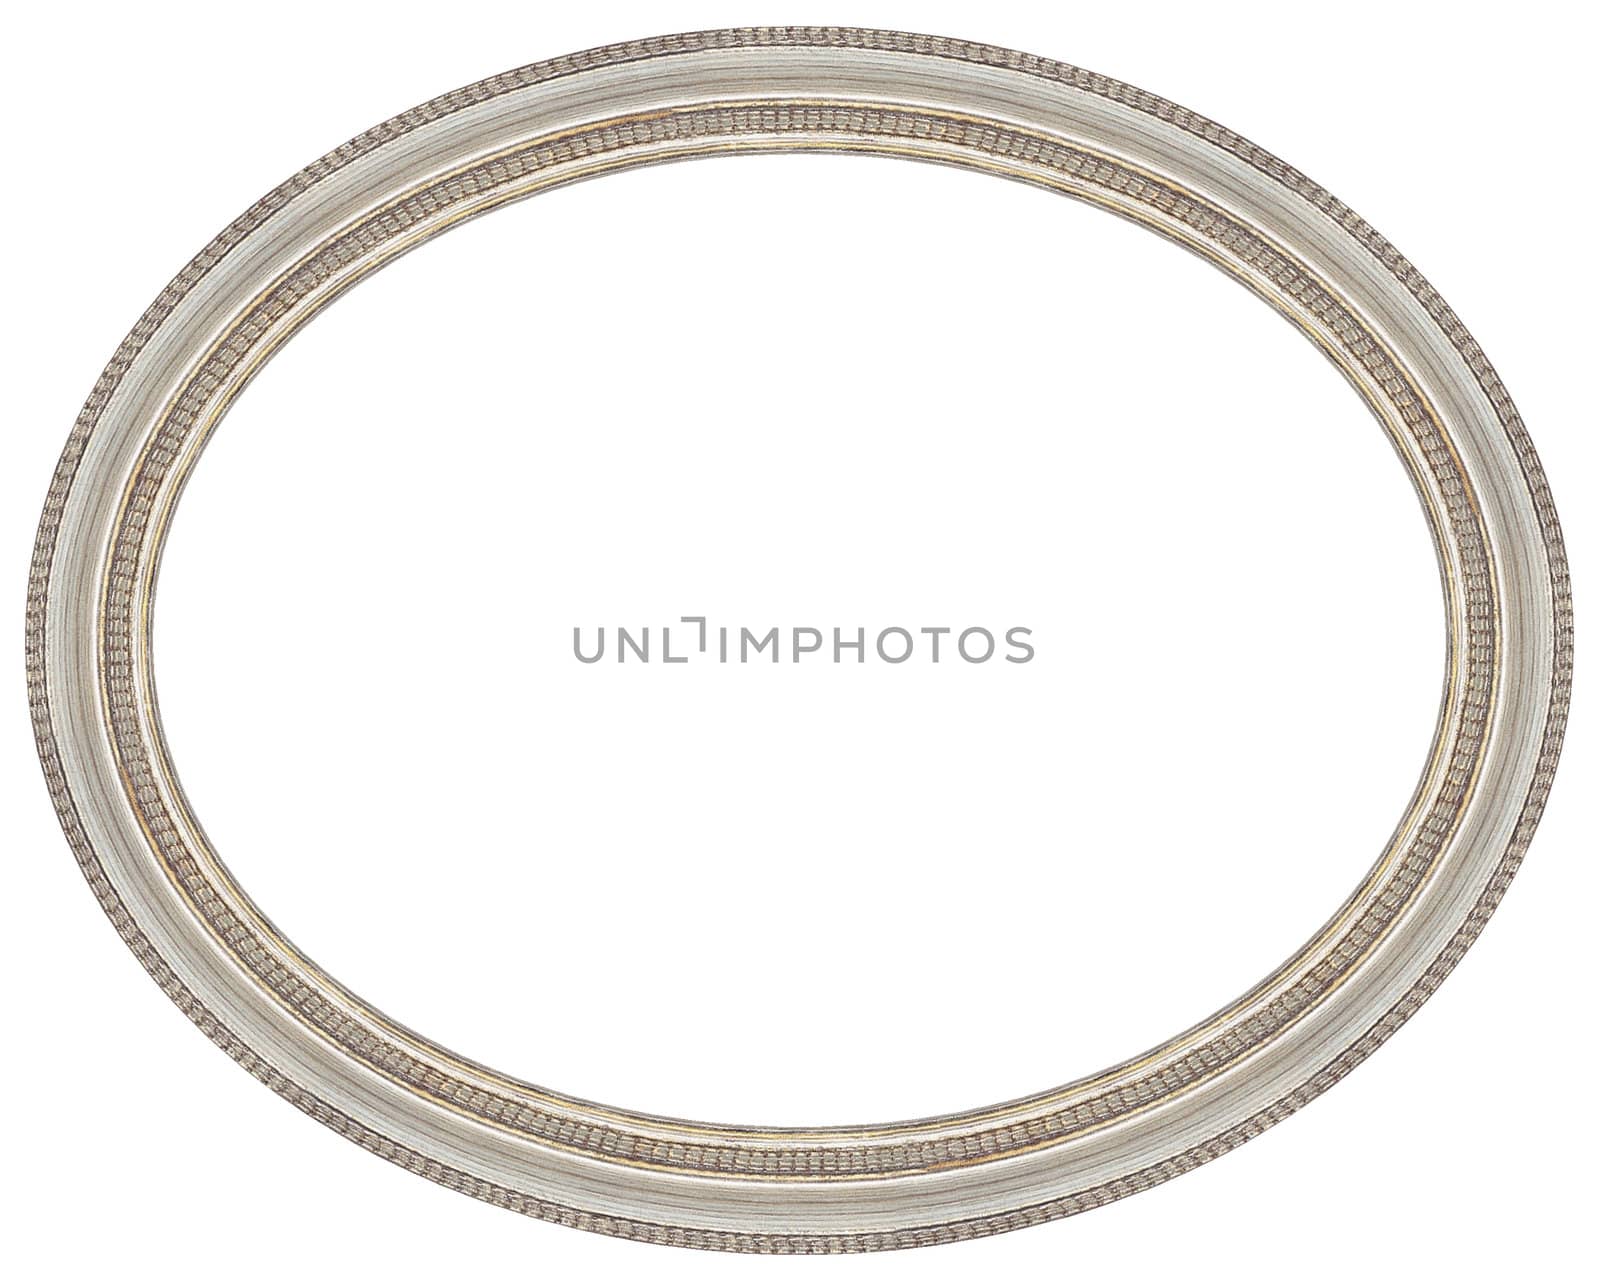 Framework under a photo of the oval form isolated on a white background